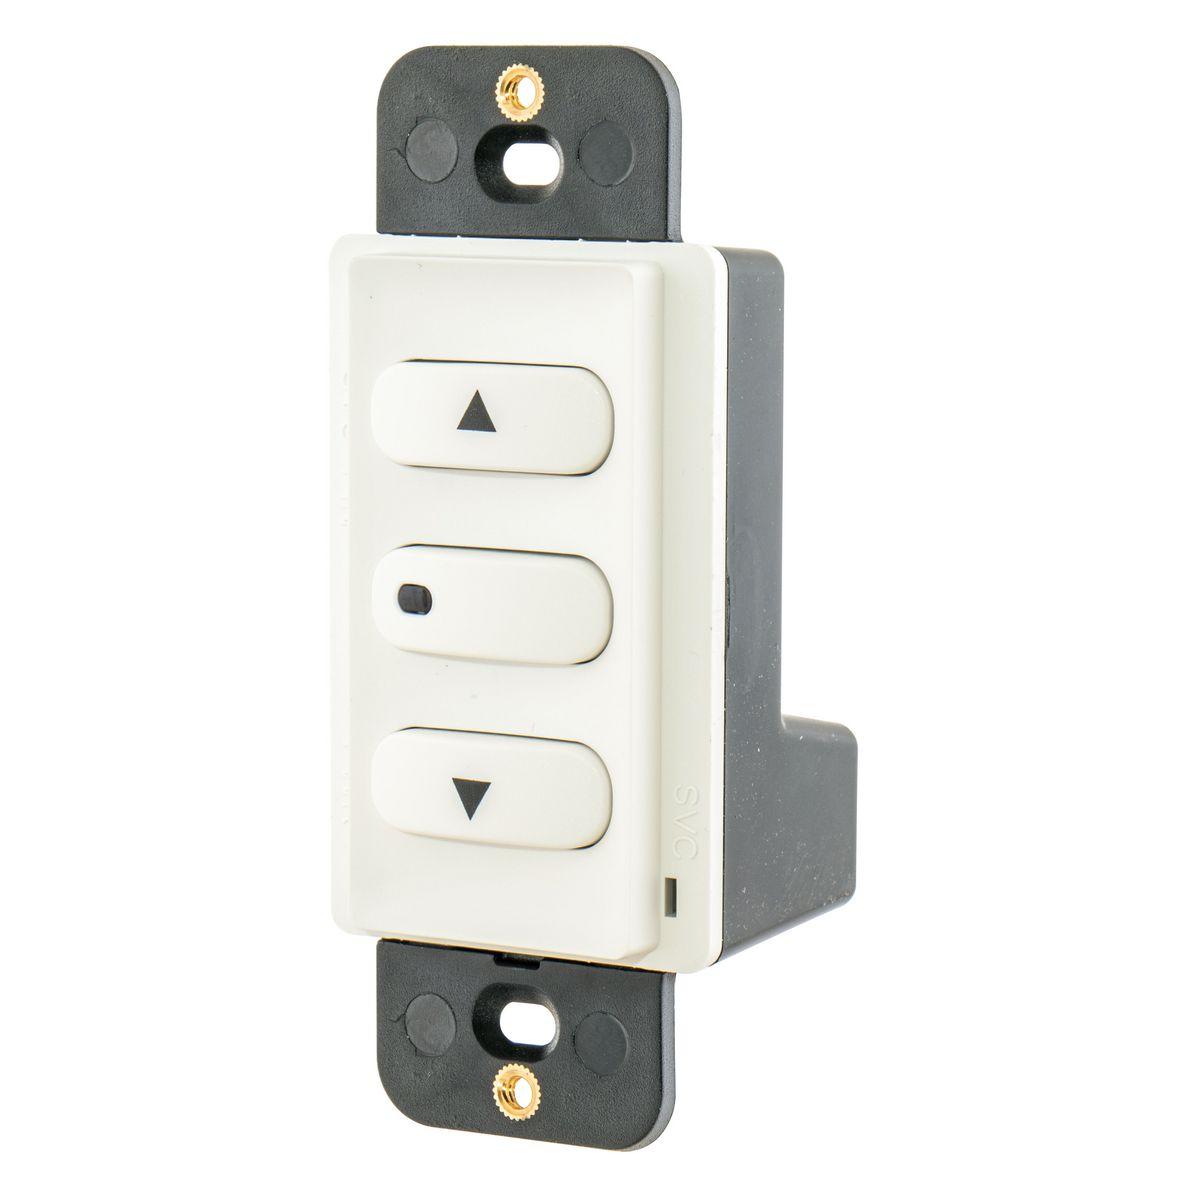 Hubbell DSL010W Switches and Lighting Control, DimmingSwitch, Low Voltage, Latching, 0-10V DC, White 